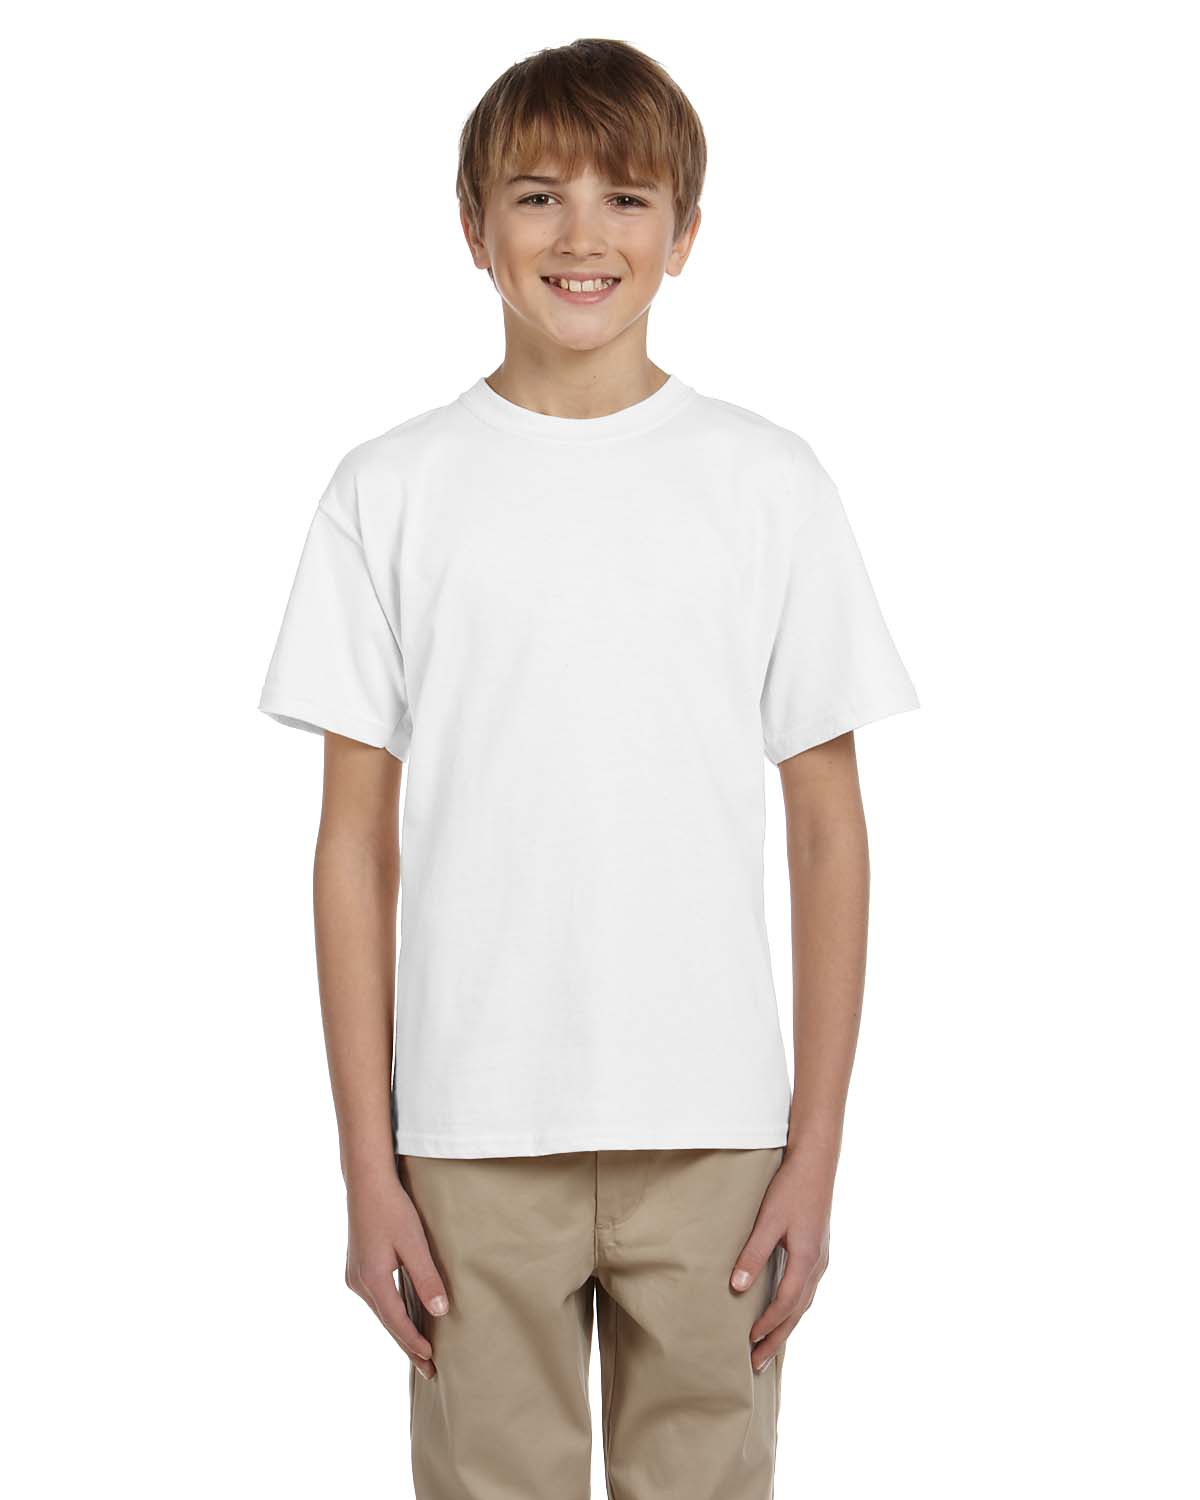 3 FRUIT OF THE LOOM  WHITE CHILDS T SHIRT ALL SIZES 